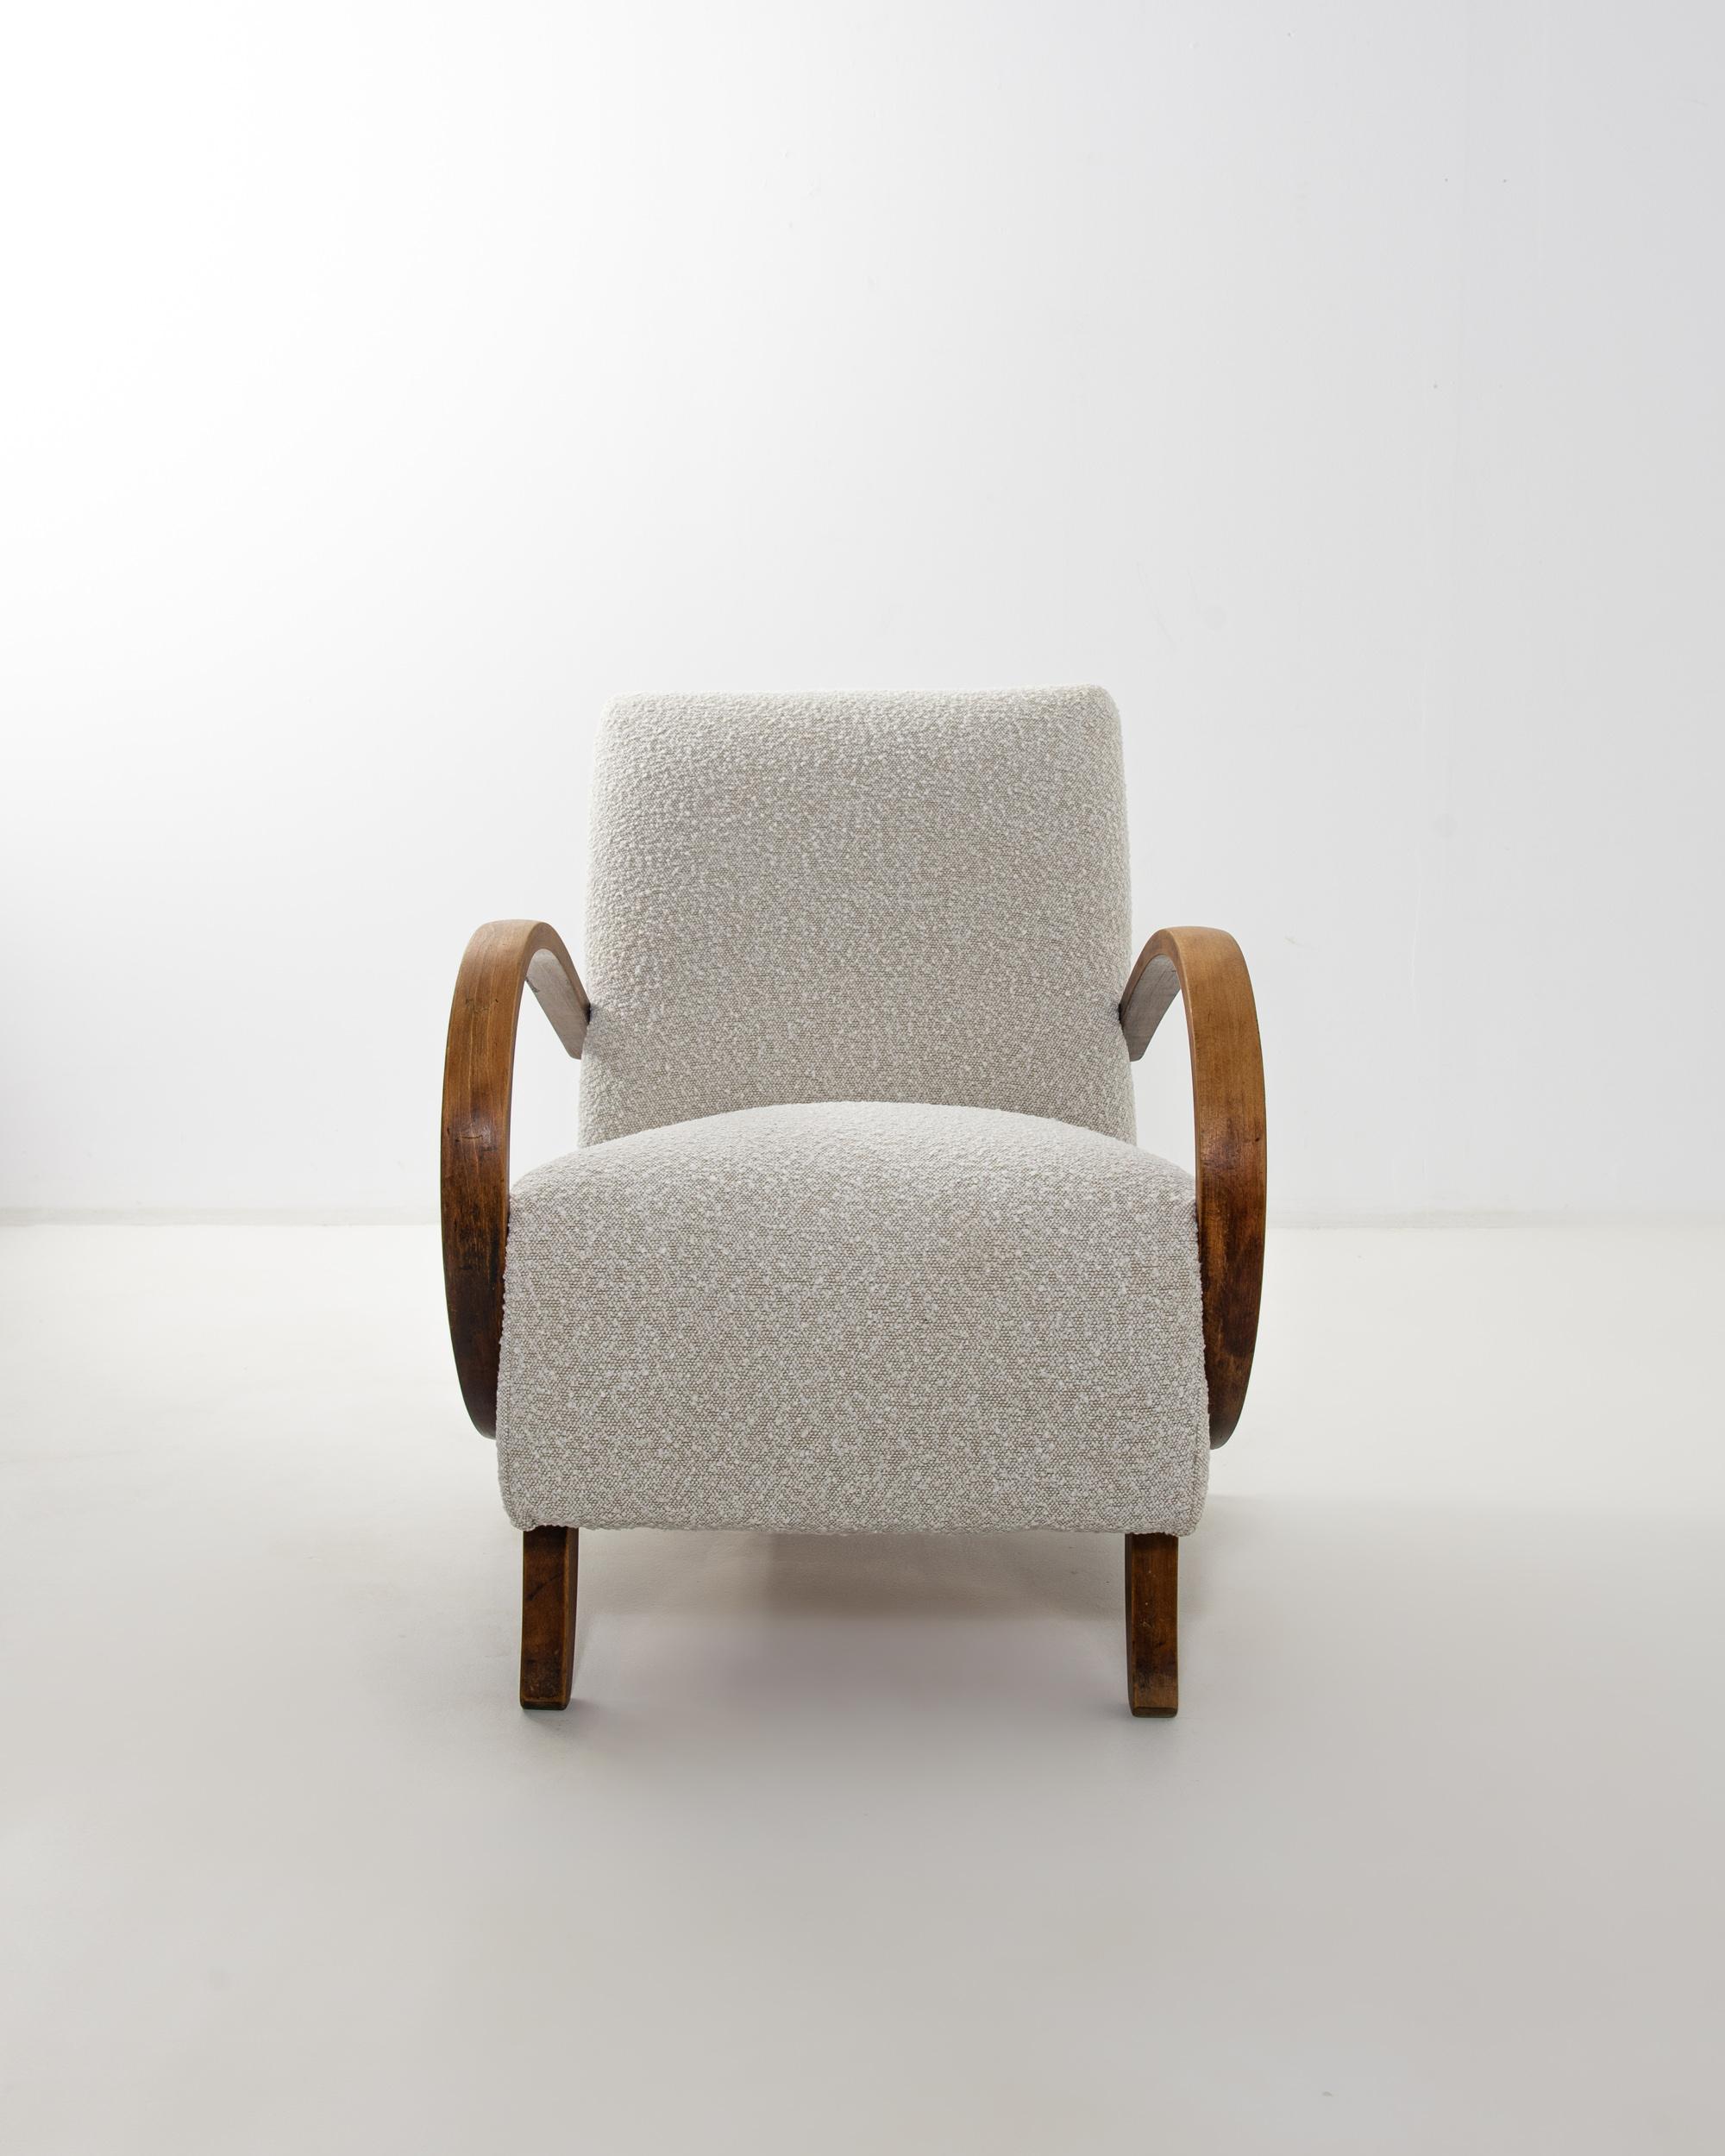 Classic bentwood combines with reupholstered white bouclé in this iconic design by J. Halabala. The chair’s curving legs and bentwood armrests dream up the dynamism of the piece. Contemporary fabric was chosen to enhance the sumptuous shape of the